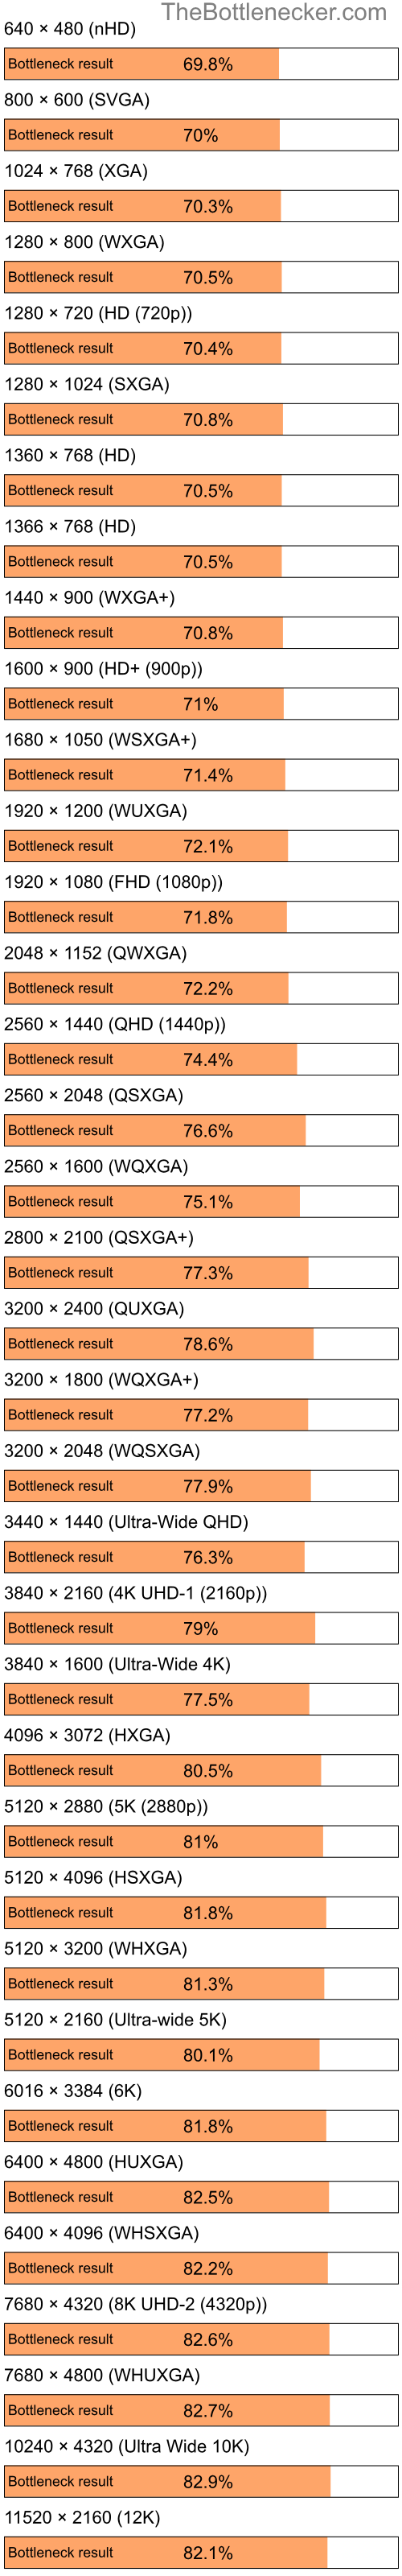 Bottleneck results by resolution for Intel Celeron M and AMD Mobility Radeon HD 4225 in7 Days to Die